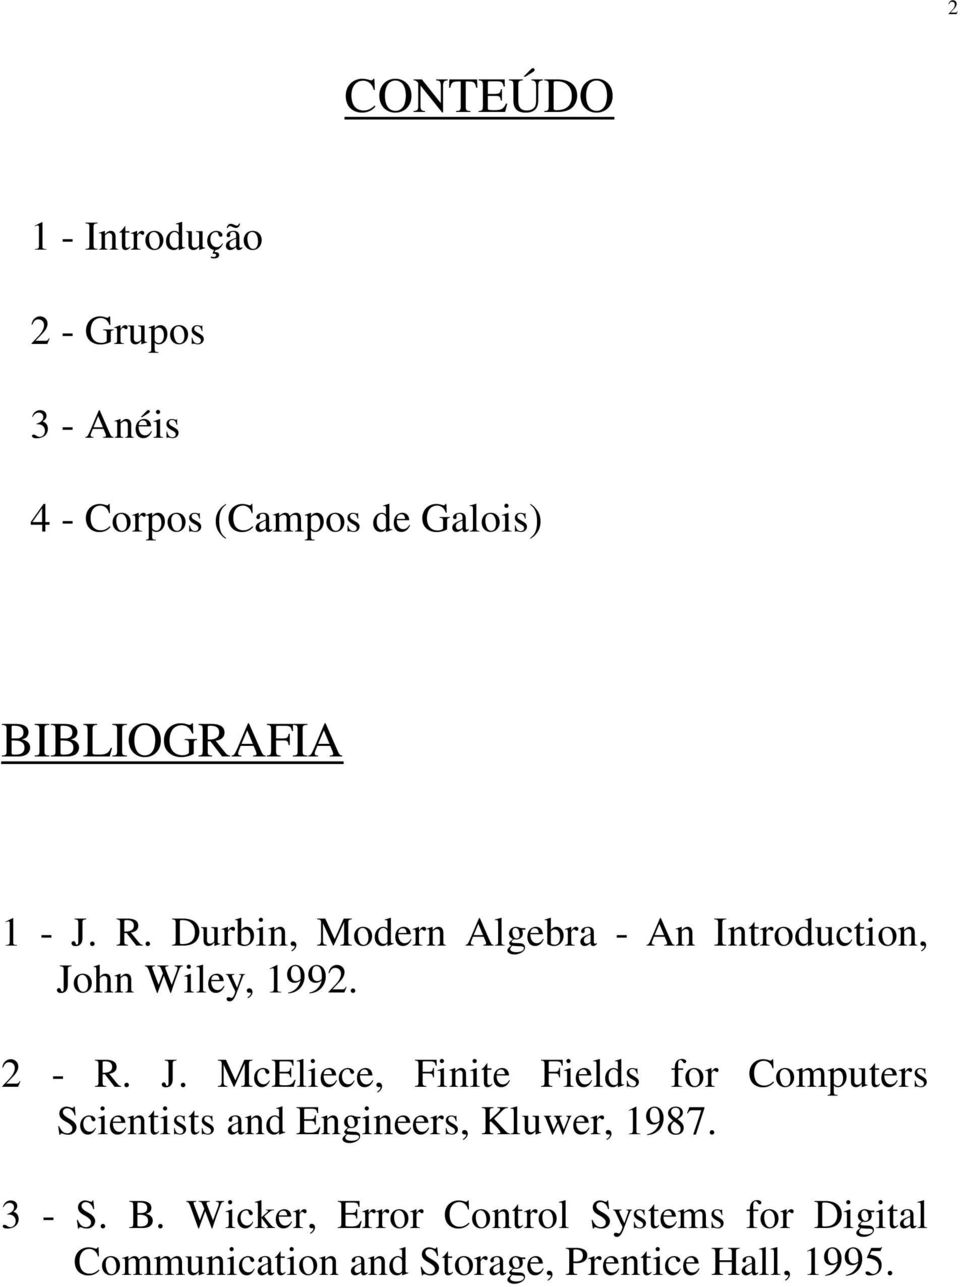 2 - R. J. McEliece, Finite Fields for Computers Scientists and Engineers, Kluwer, 1987.